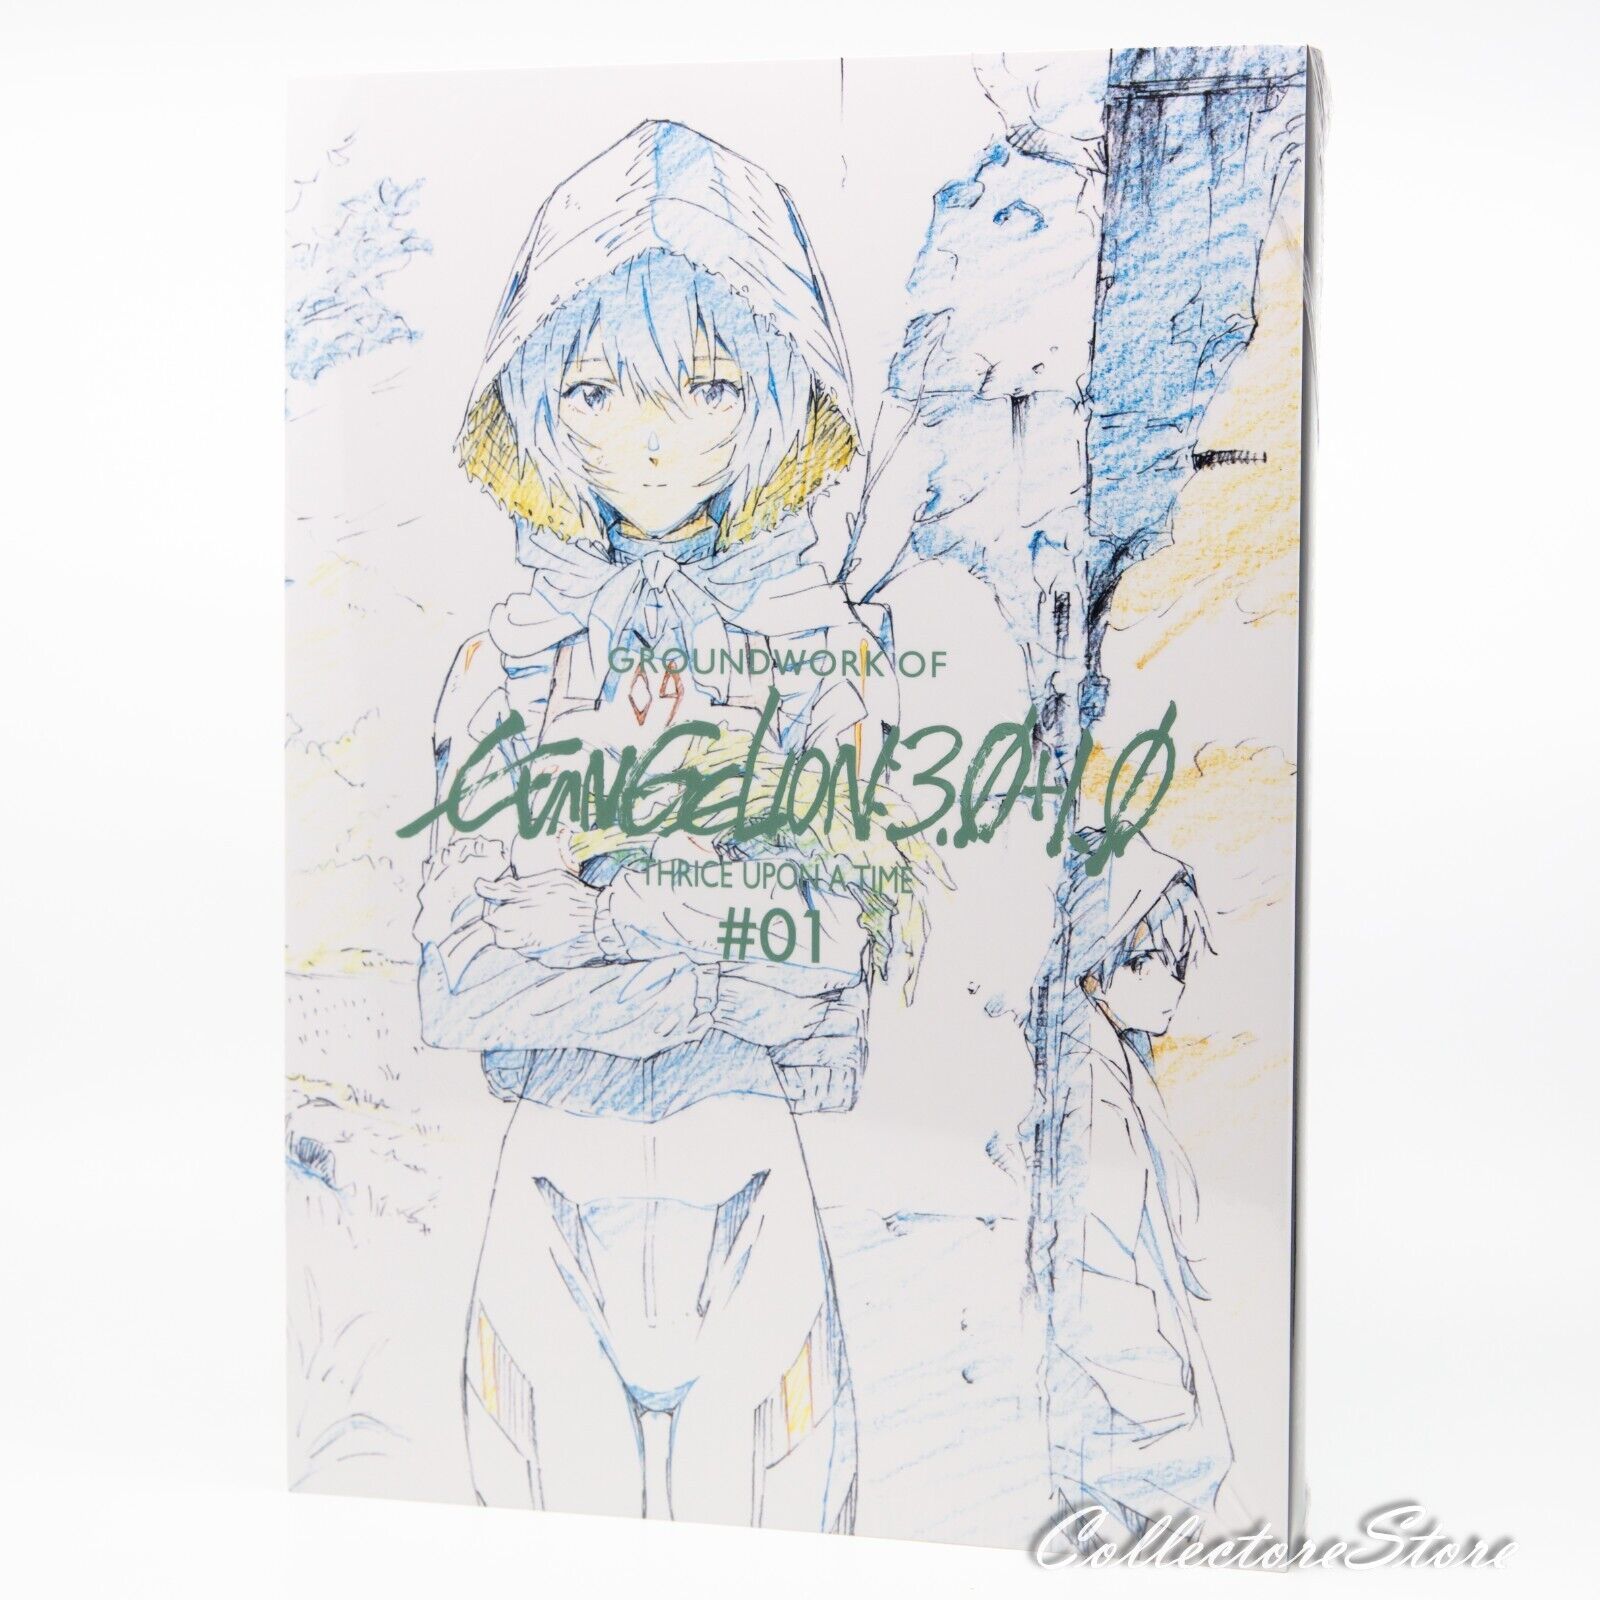 Groundwork of Evangelion: 3.0+1.0 Thrice Upon a Time #01 (DHL/FedEx)